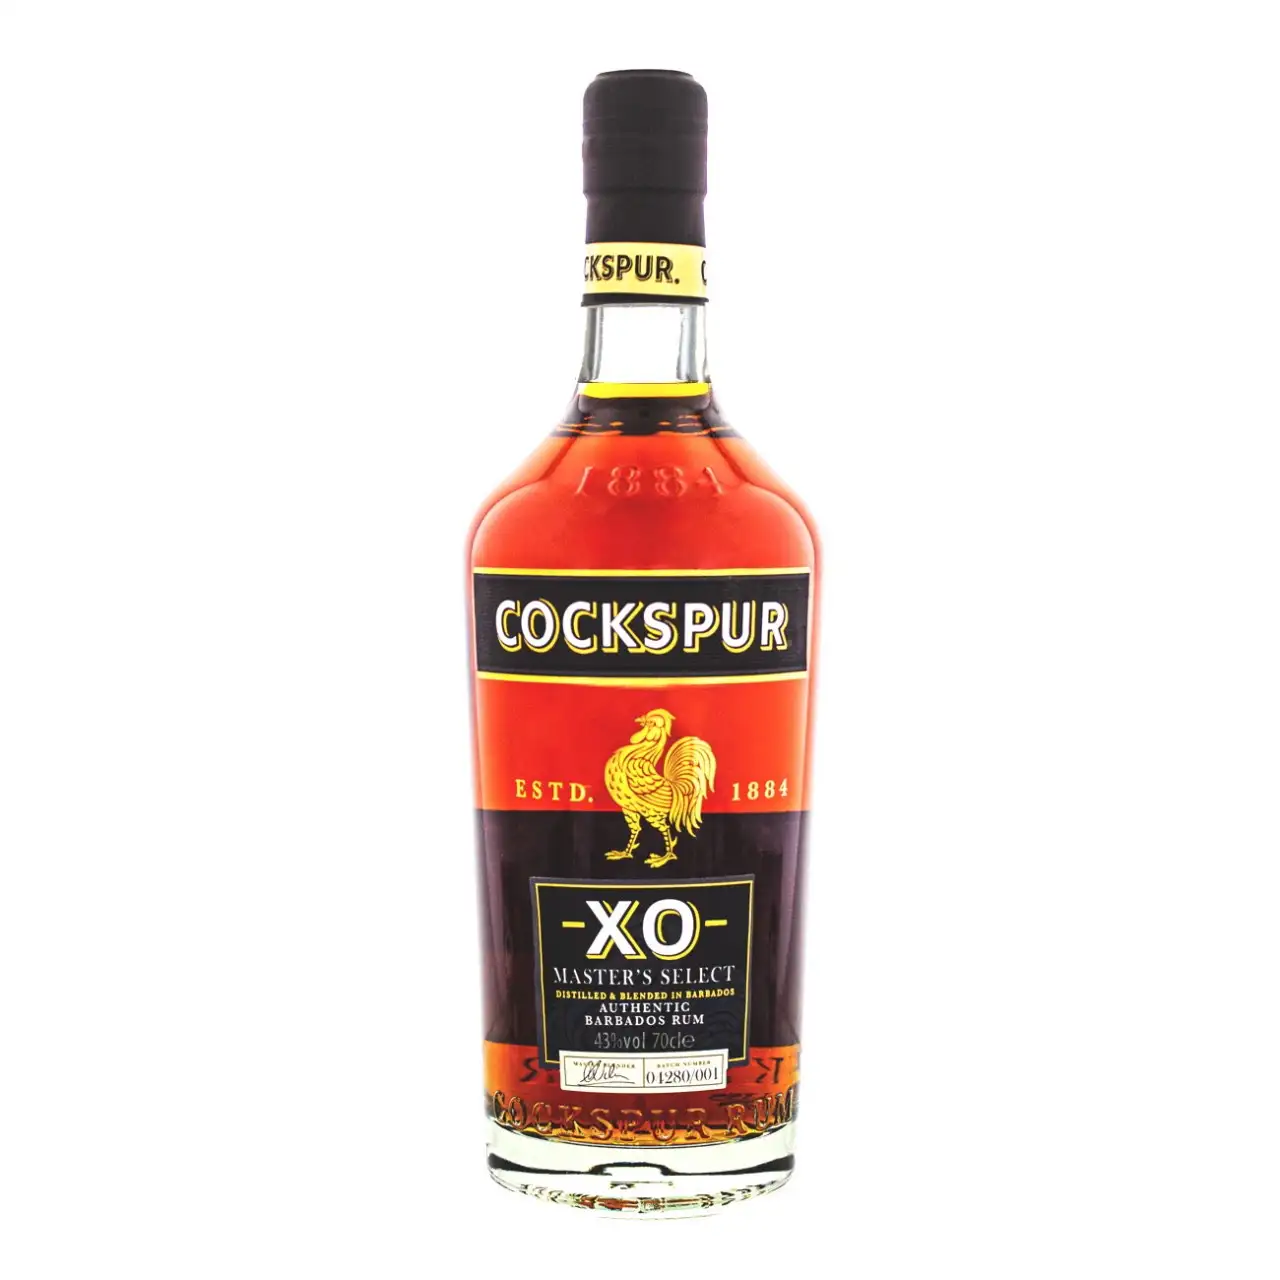 Image of the front of the bottle of the rum Cockspur XO Masters Select